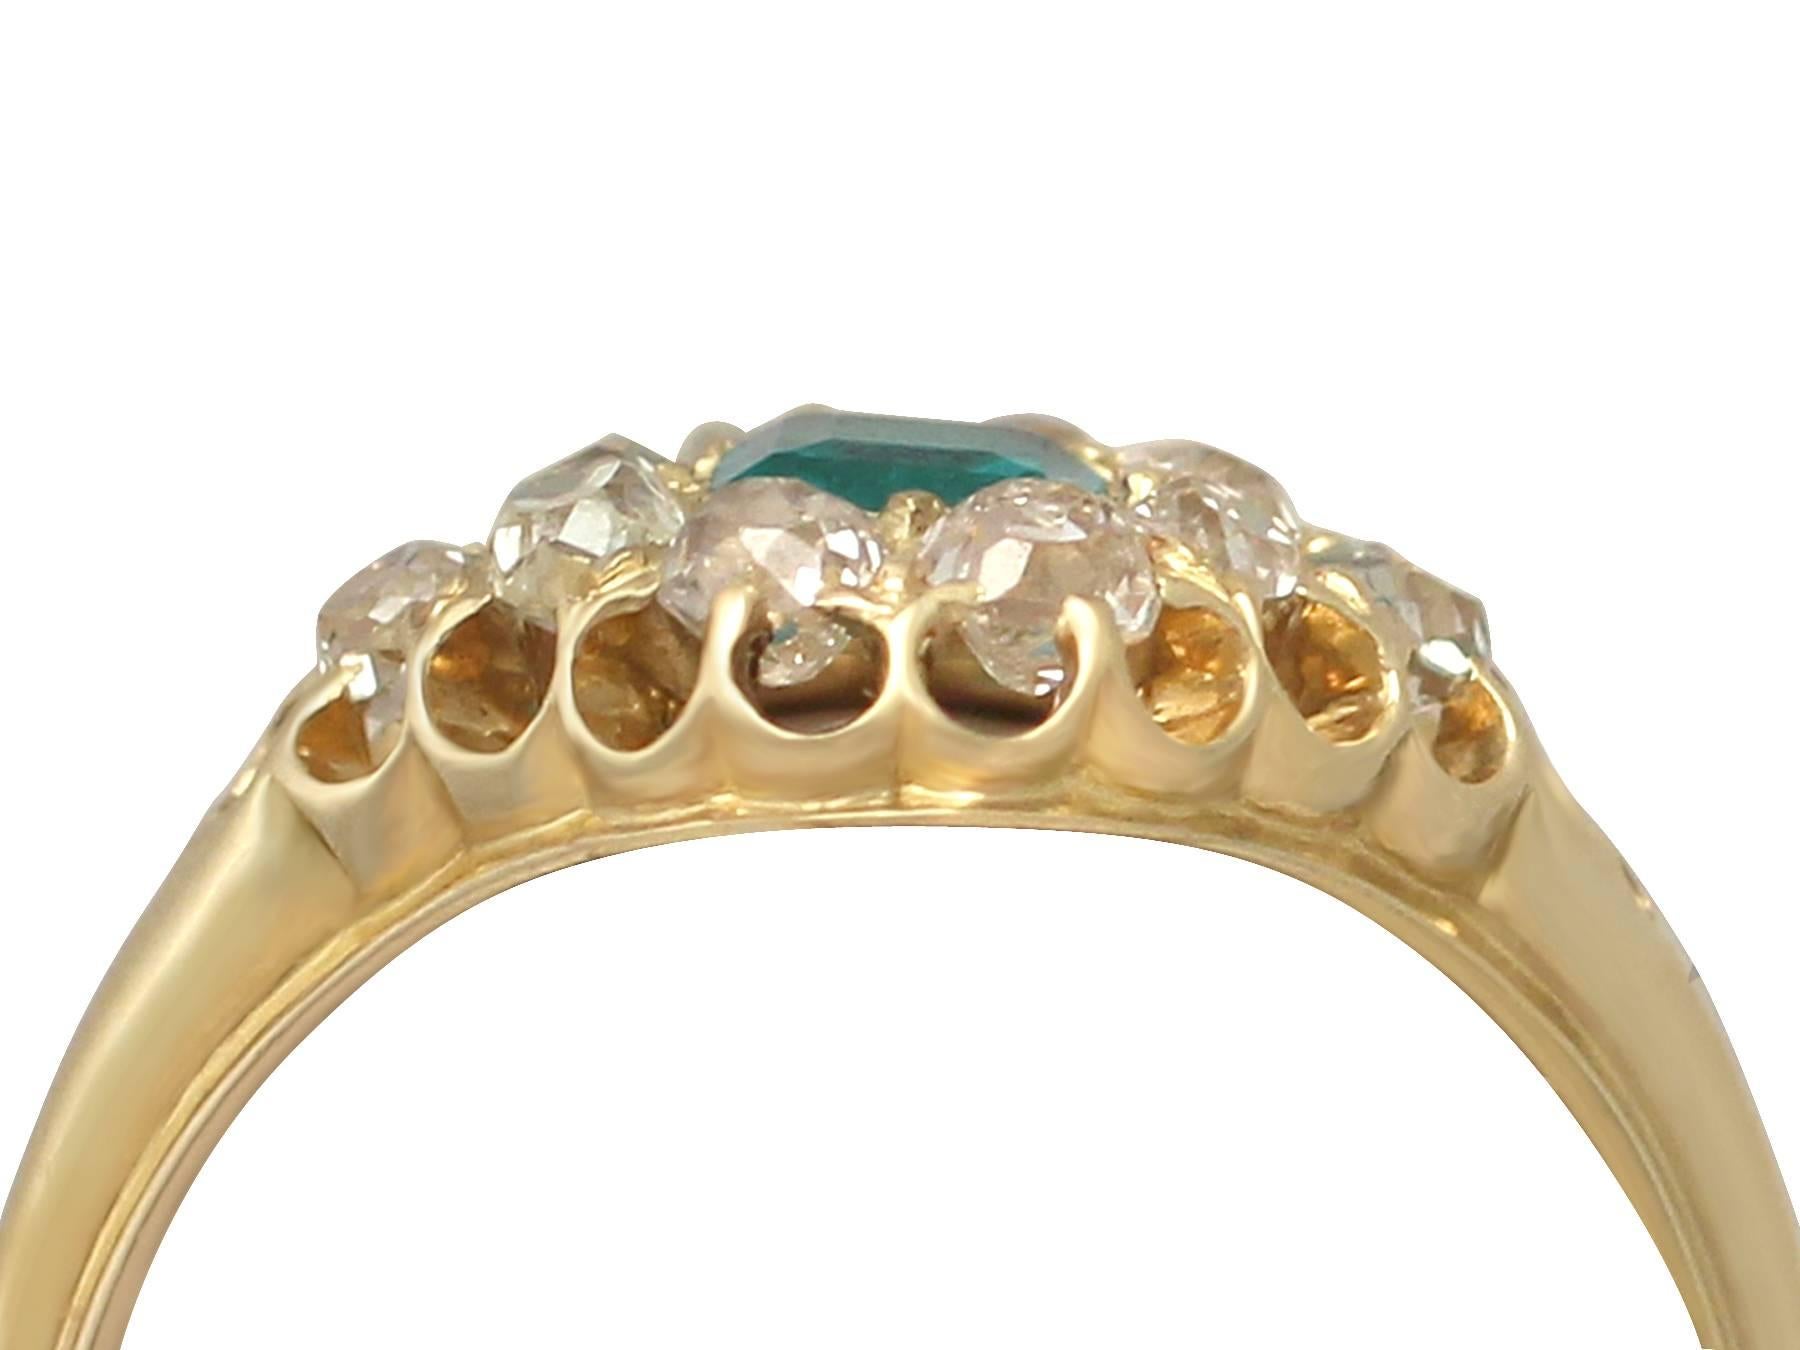 A fine and impressive antique 0.33 carat emerald and 0.66 carat diamond, 18k yellow gold dress ring; part of our diverse antique jewellery and estate jewelry collections

This fine and impressive antique 1800's dress ring has been crafted in 18k